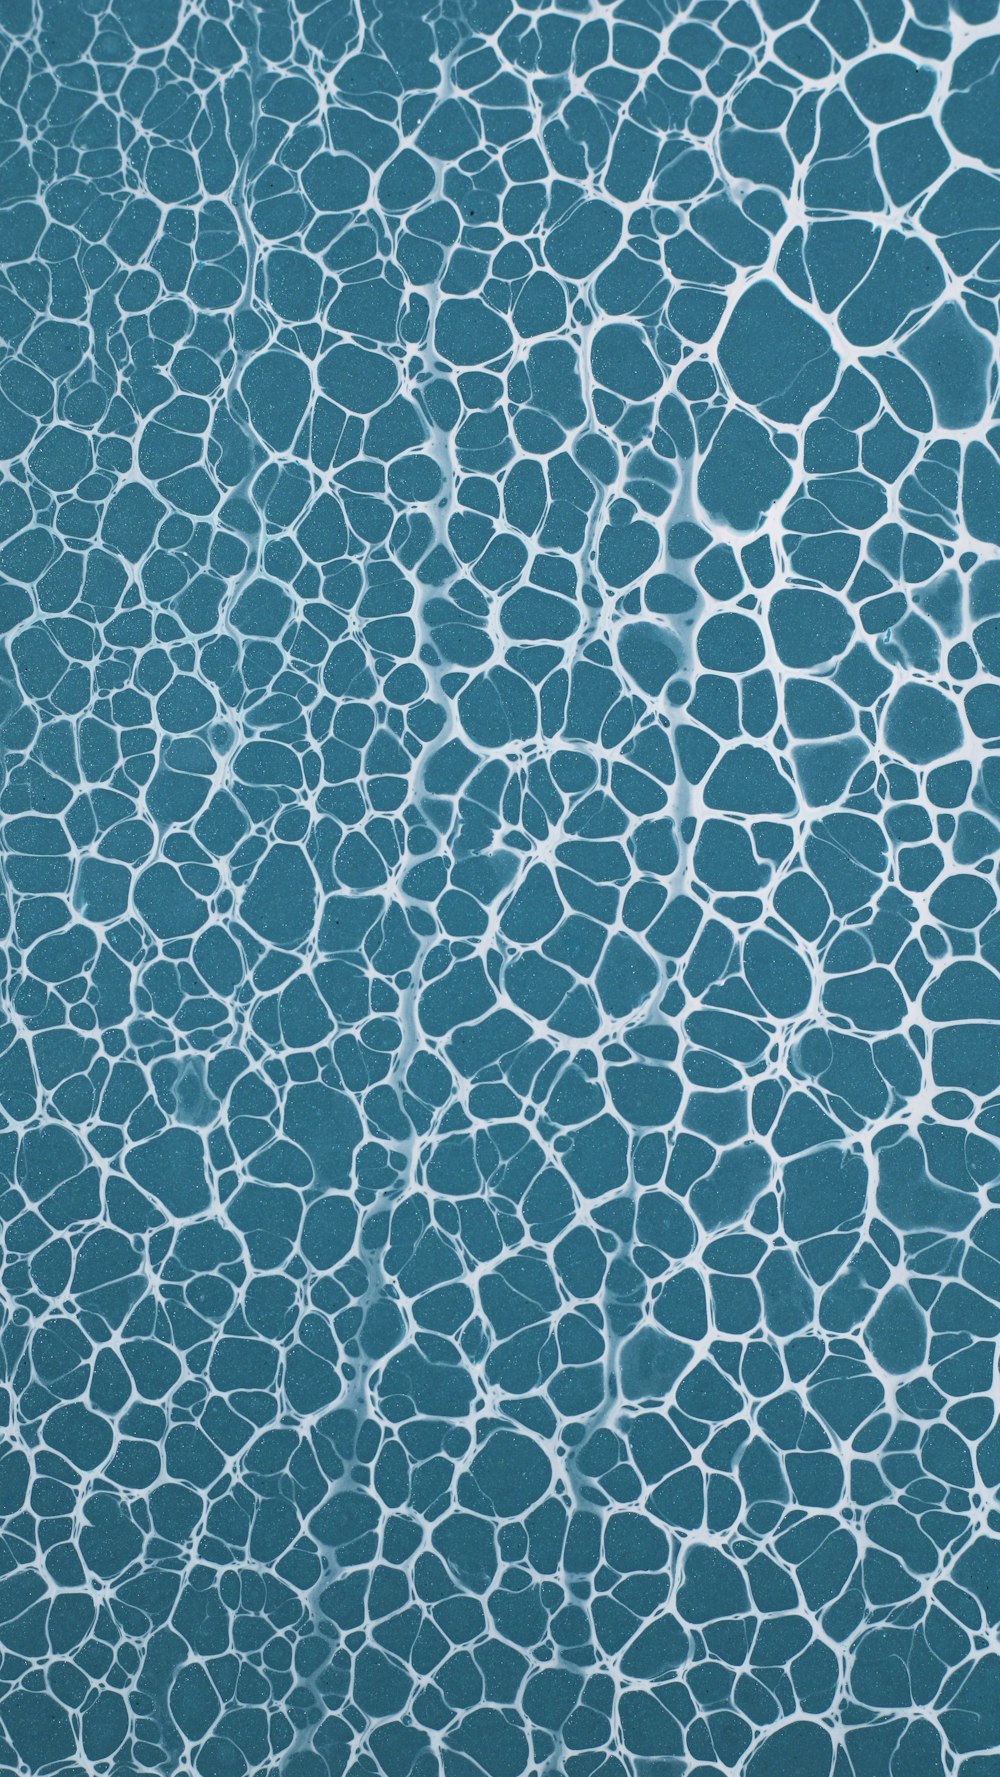 a blue water surface with white lines on it